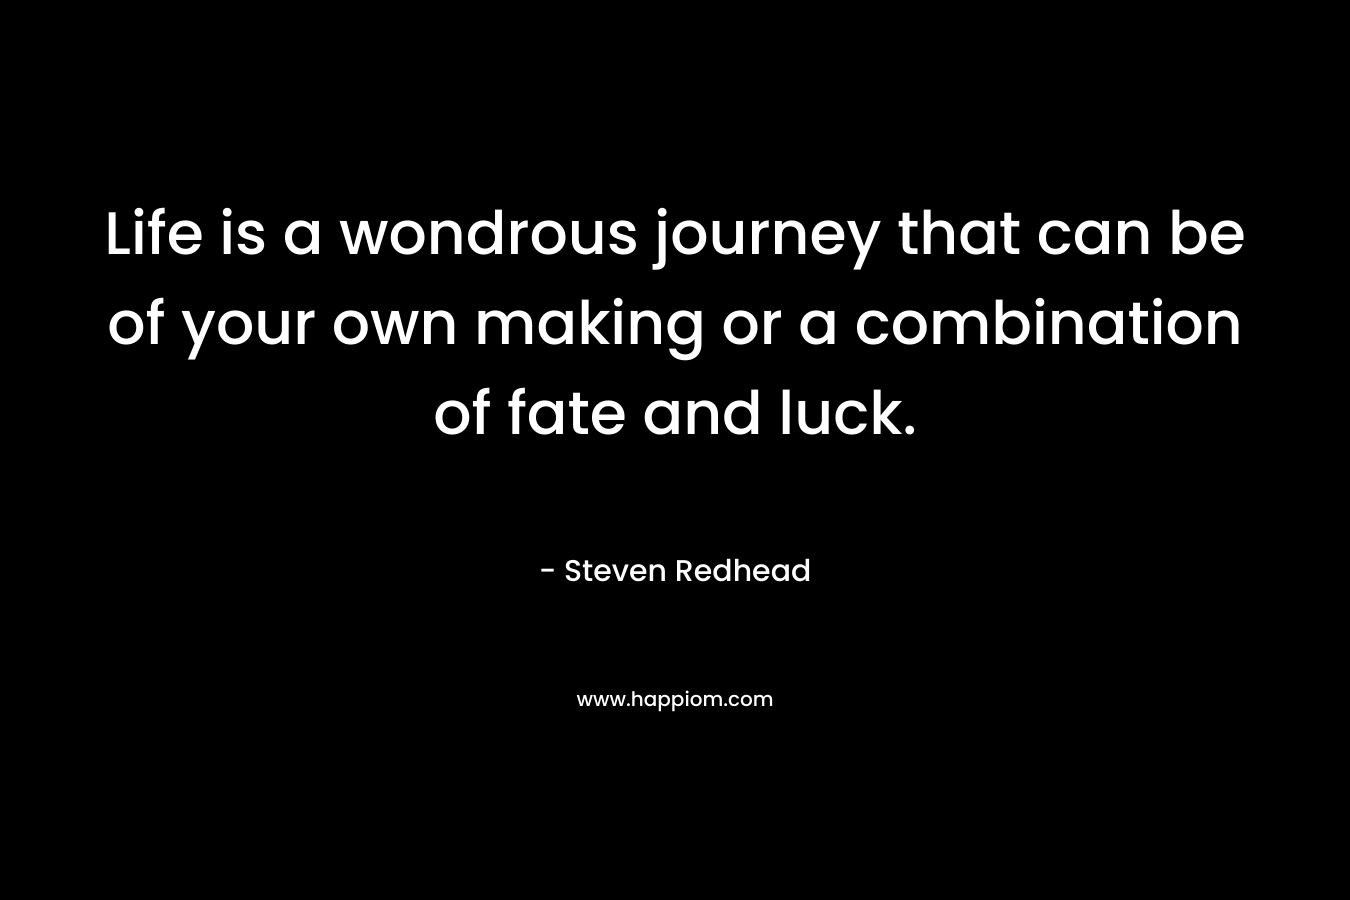 Life is a wondrous journey that can be of your own making or a combination of fate and luck.